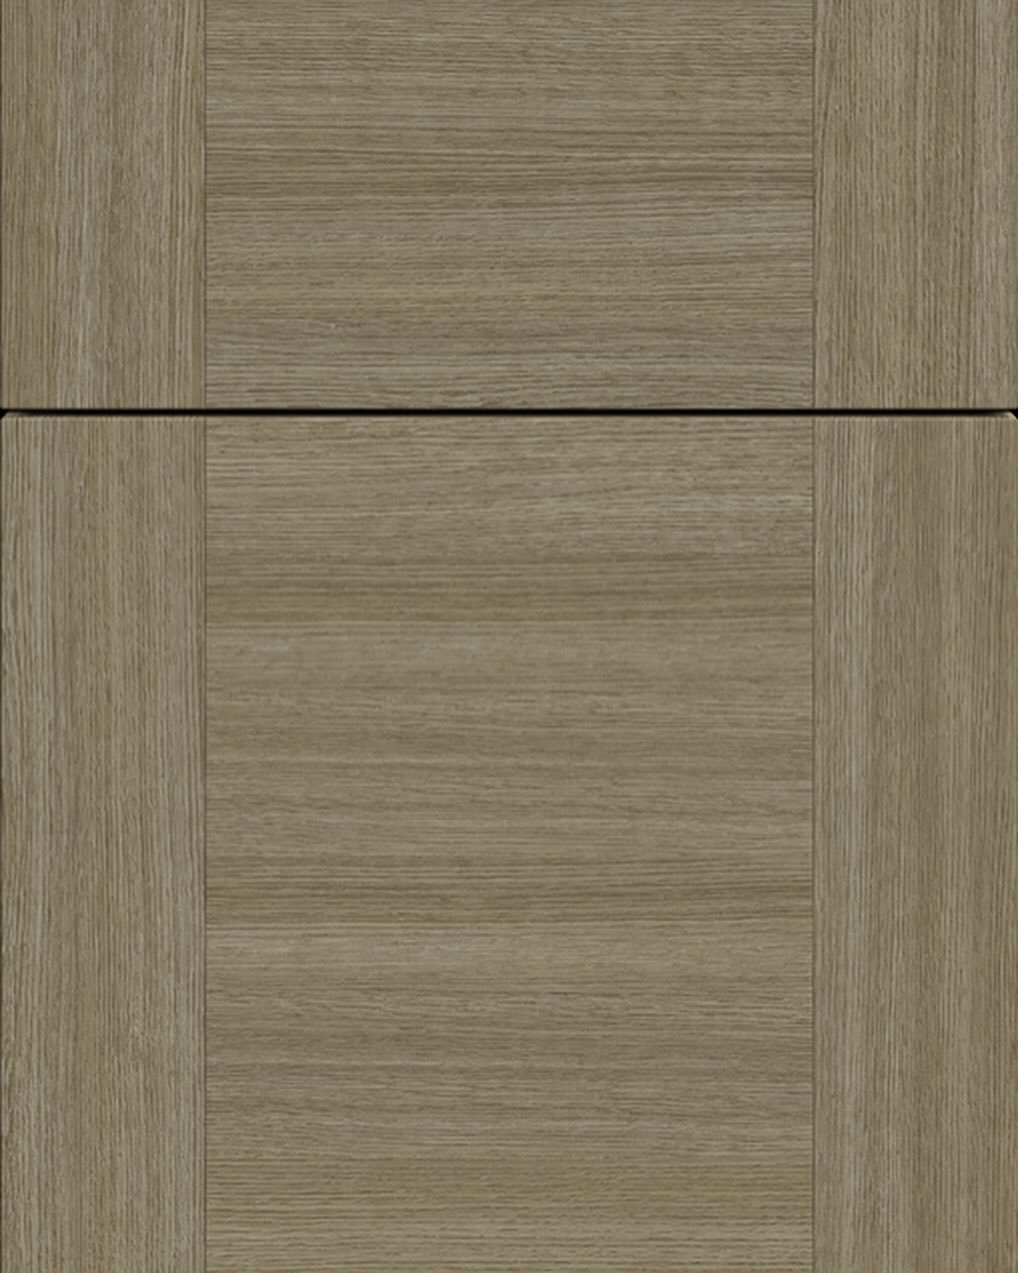 Introducing our latest textures, colors and our modern/slim shaker door.  Our slim shaker is available in our UltraMatte material (all colors) and select textured melamine colors.  The new colors are a medium texture with a linear intermittent brushe